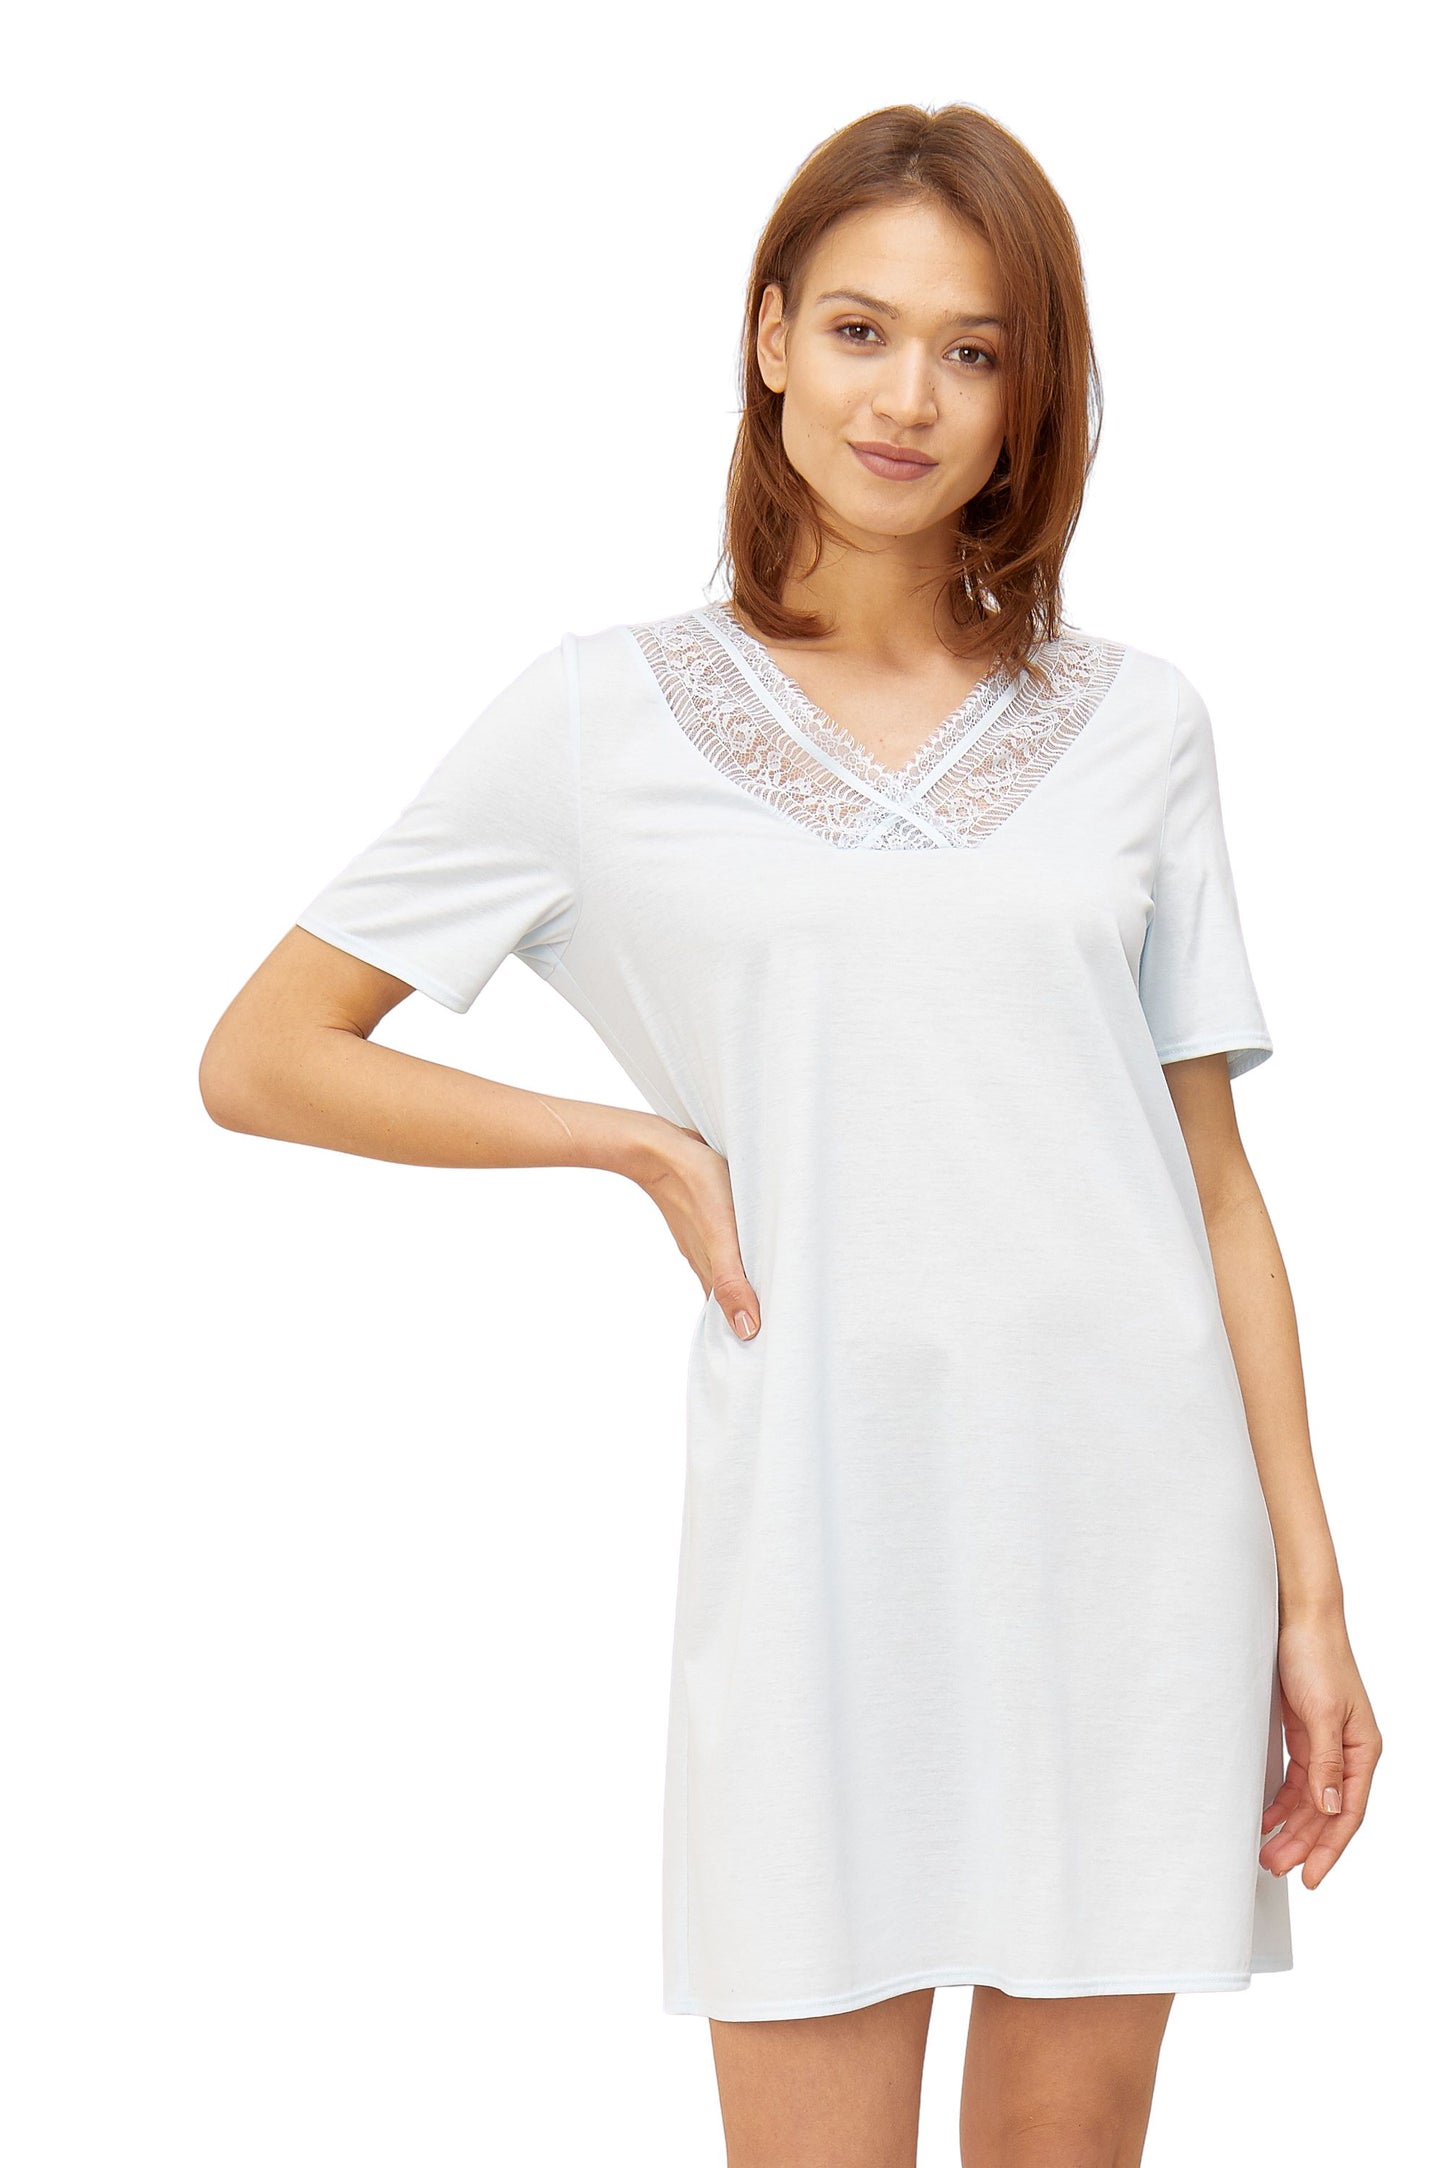 The Féraud Paris' High Class line debuts this opulent, ultra-soft nightgown, crafted from fine single-jersey 100% cotton, and embellished with exquisite lace detailing. 